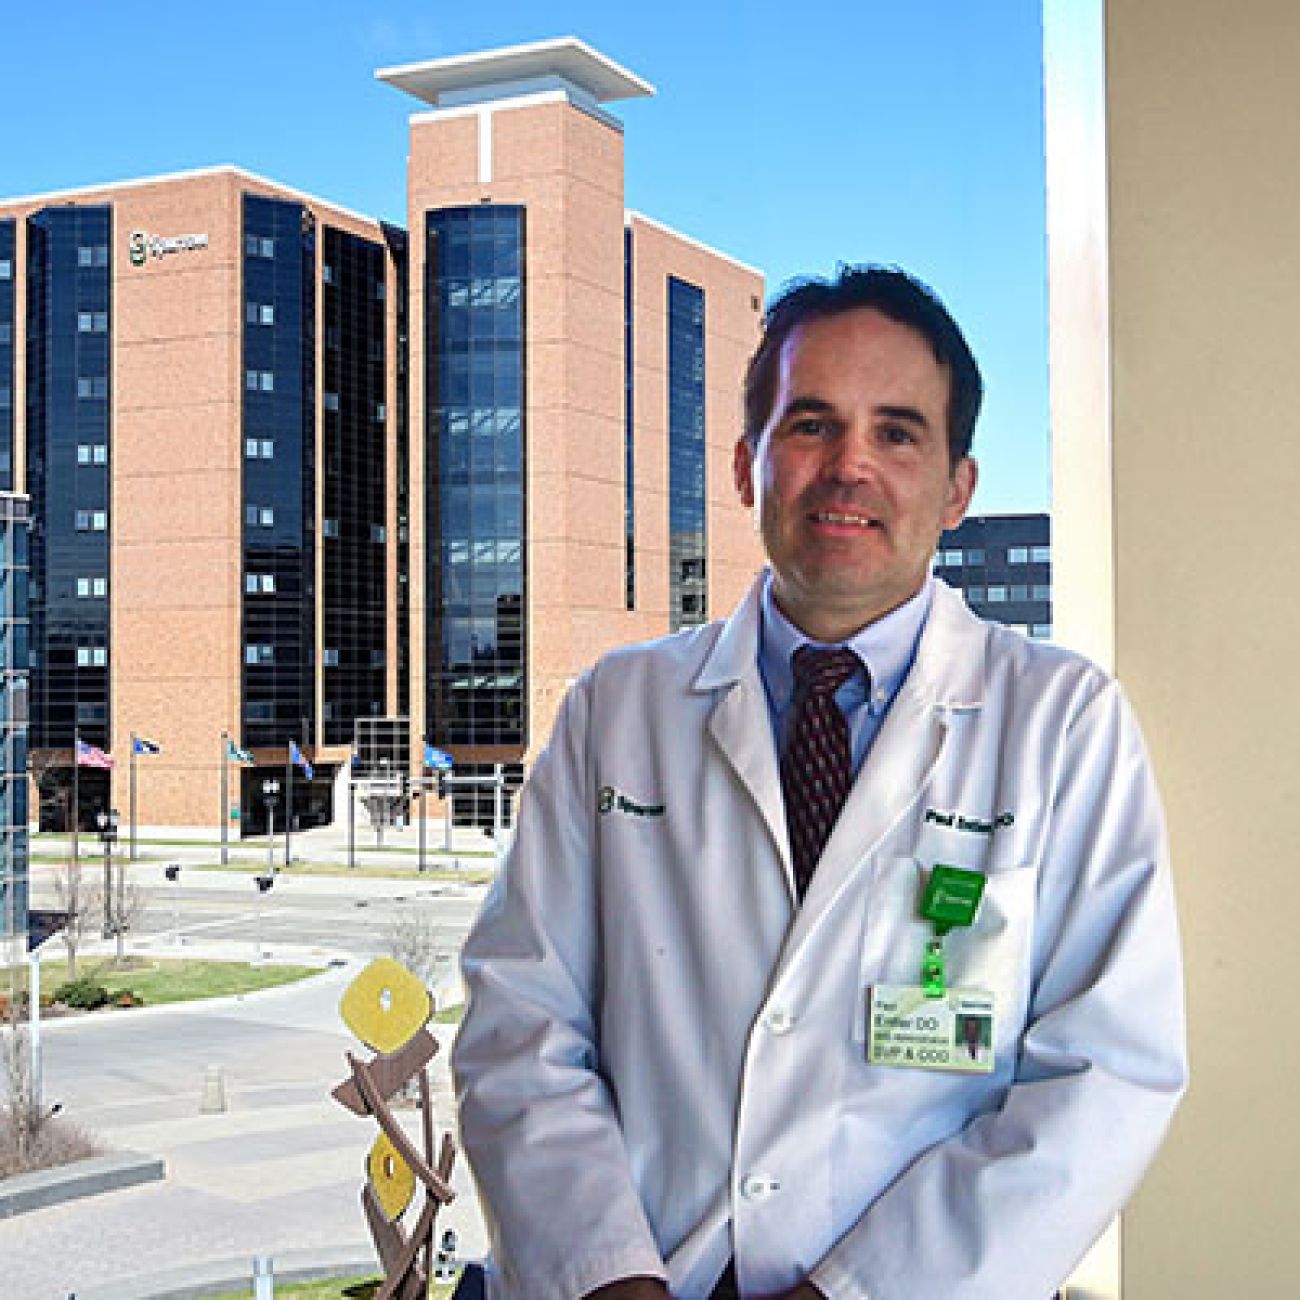 Dr. Paul Entler, chief clinical officer at Sparrow hospital, posing in front of a window